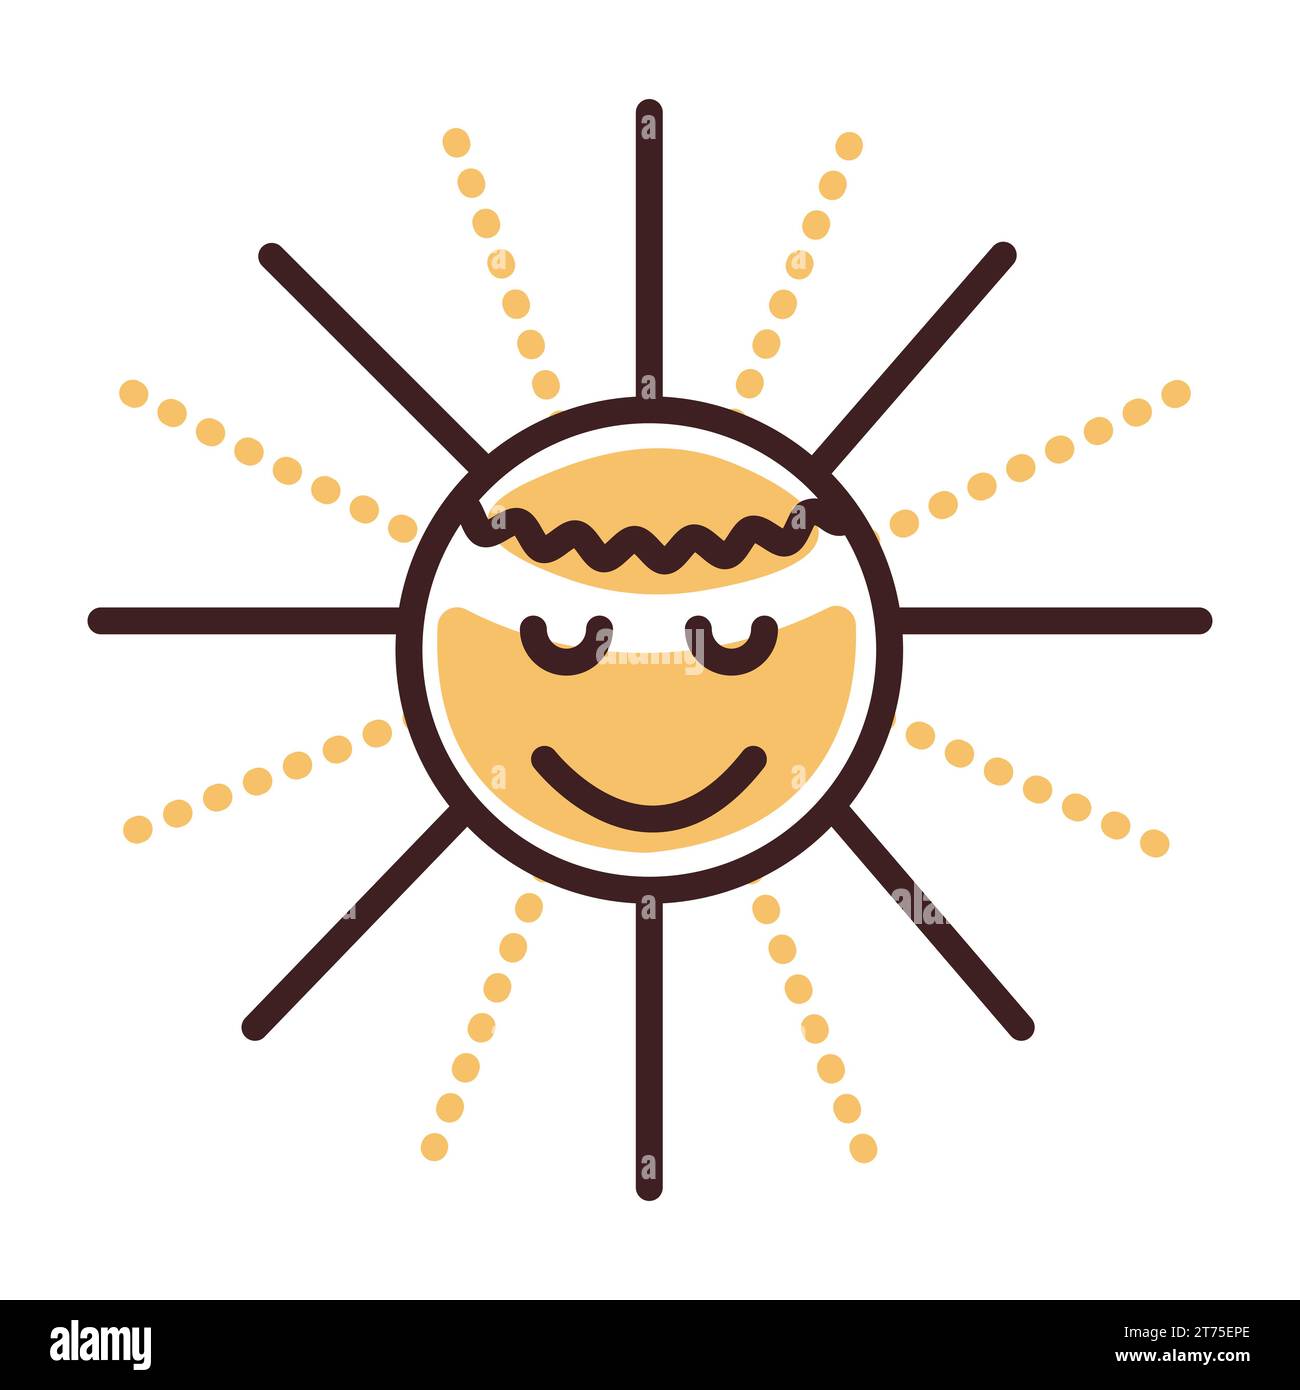 Groovy sun, summer season icon in yellow and brown colors Stock Vector